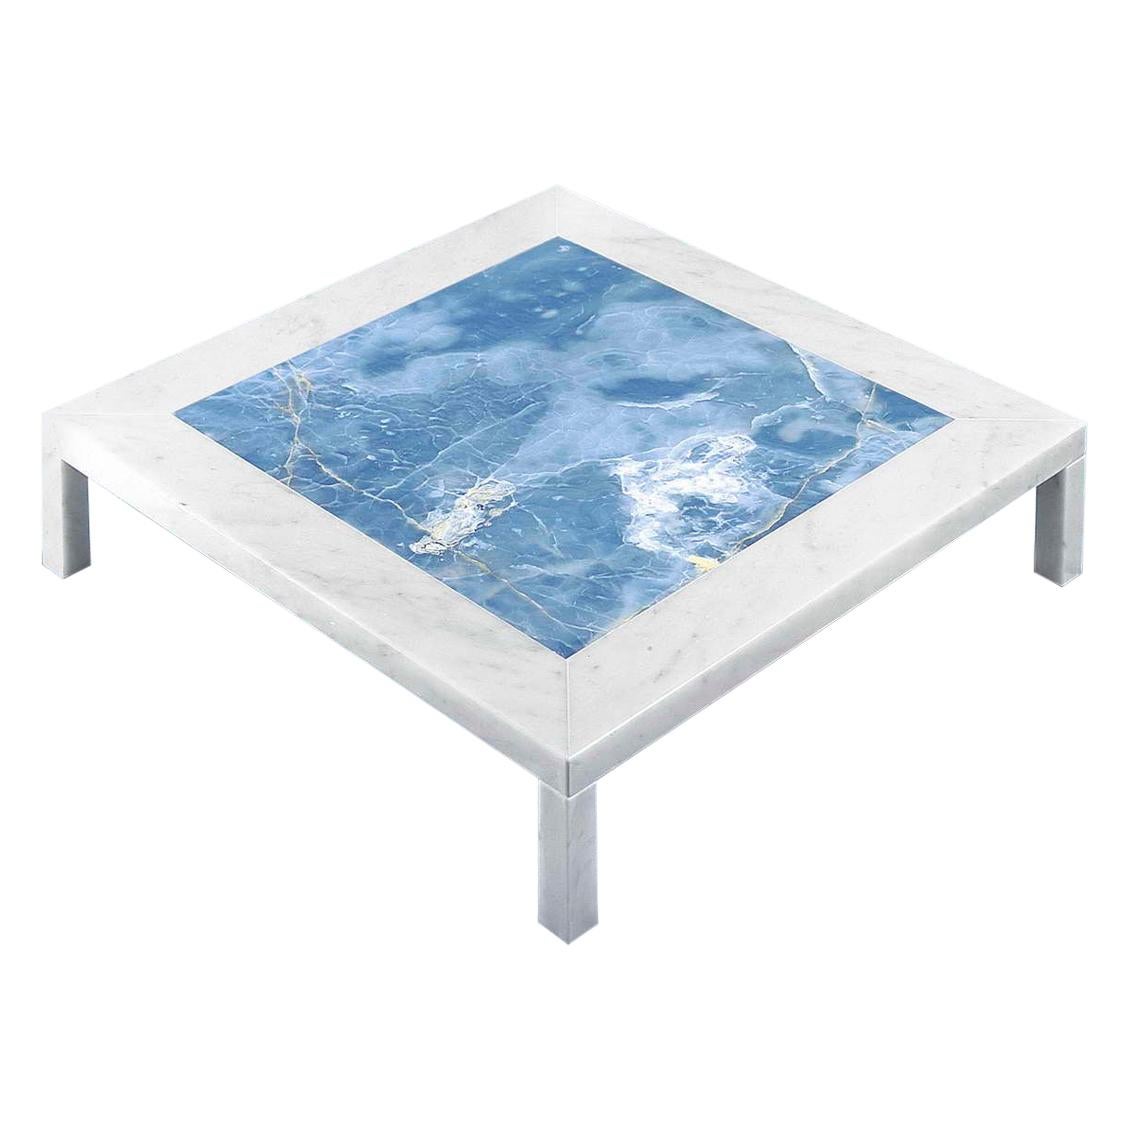 21st Century by Arch. M.Piva "FUMO" Square Marble Table in White P. & Blu Onix For Sale